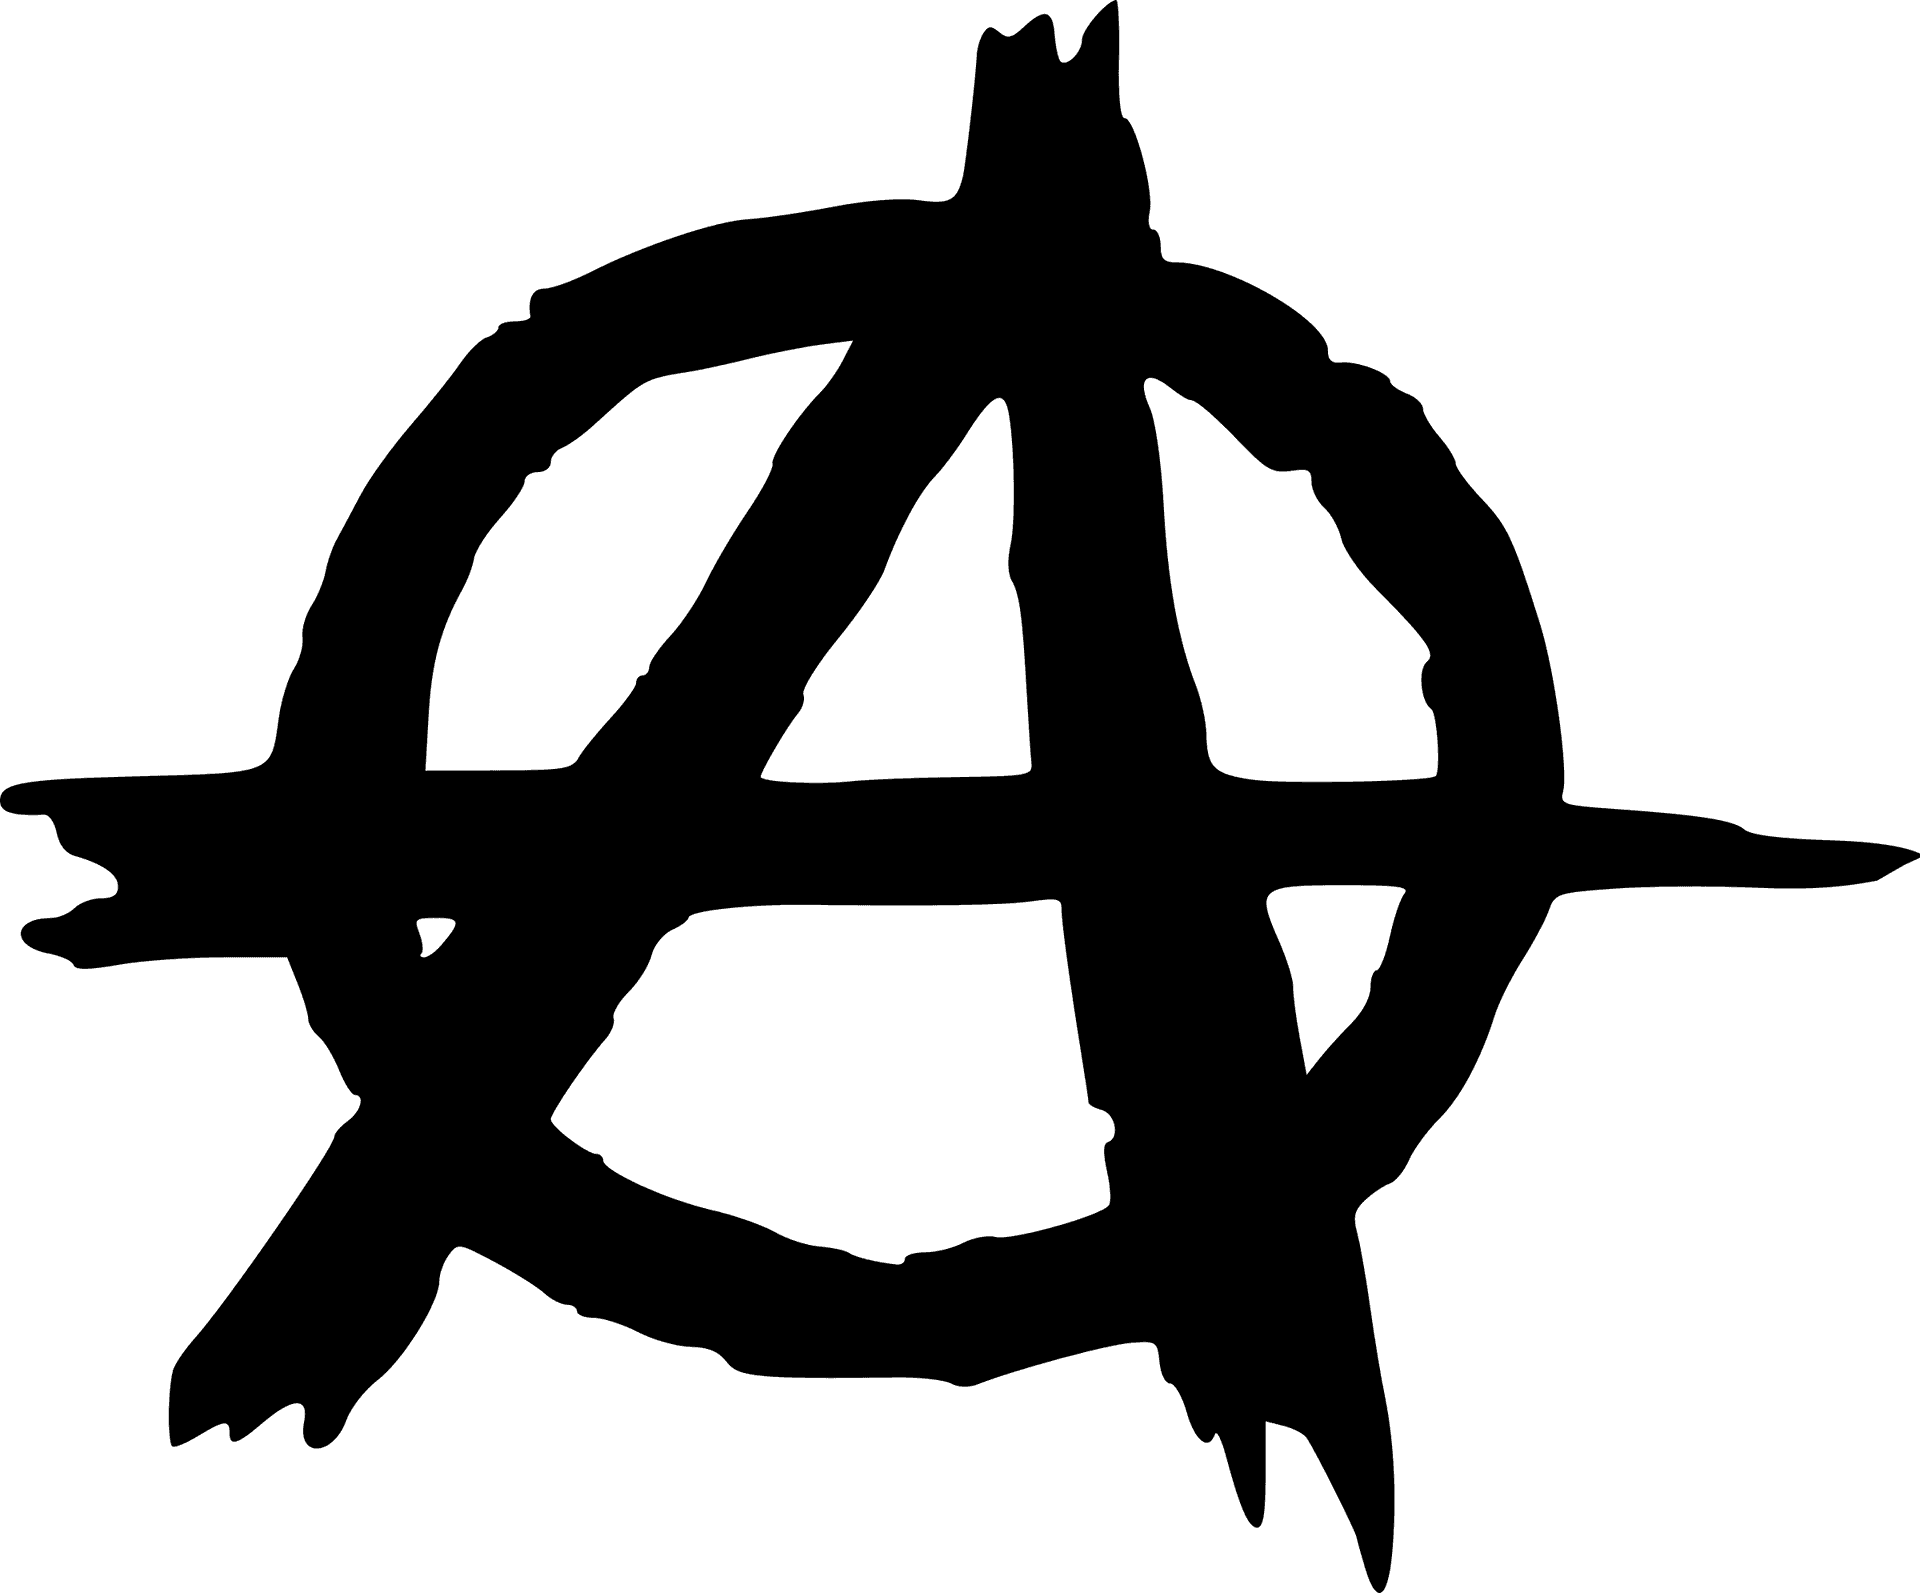 Anarchy Symbol Black Silhouette PNG image